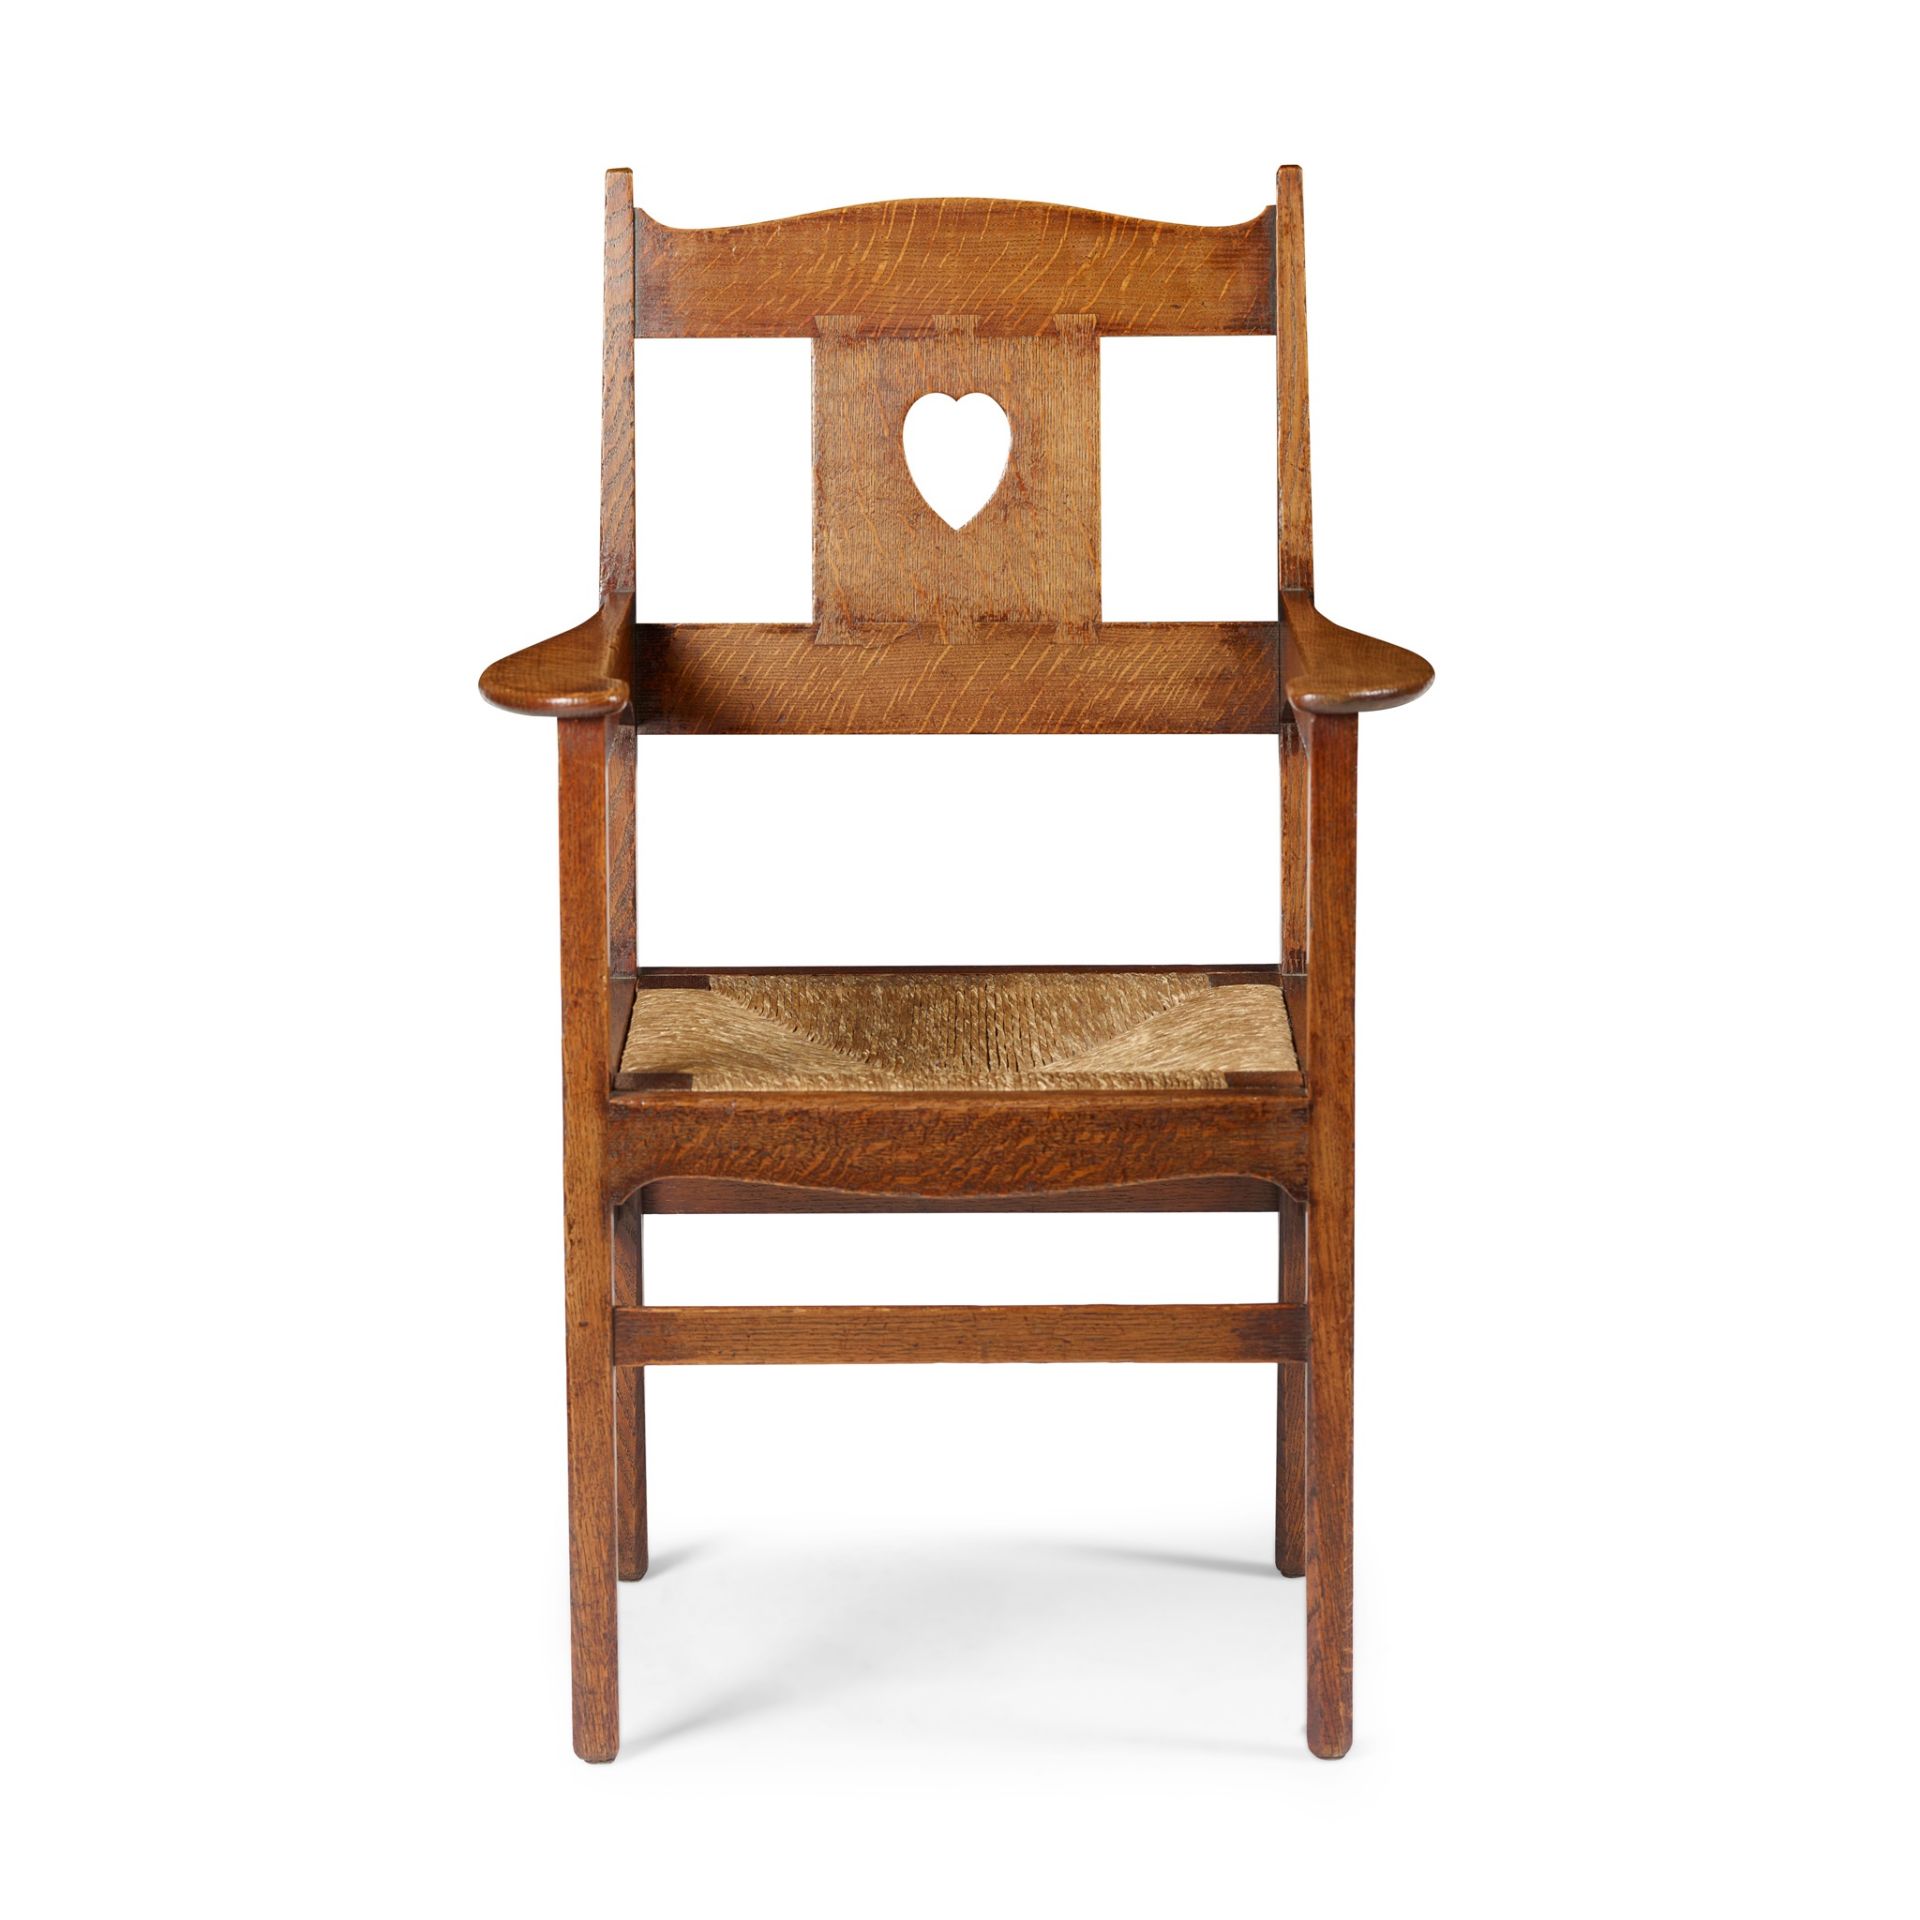 C.F.A. VOYSEY (1857-1941) (DESIGNER), F.C.NIELSON, LONDON (ATTRIBUTED MAKER) ARTS & CRAFTS ARMCHAIR, - Image 2 of 2